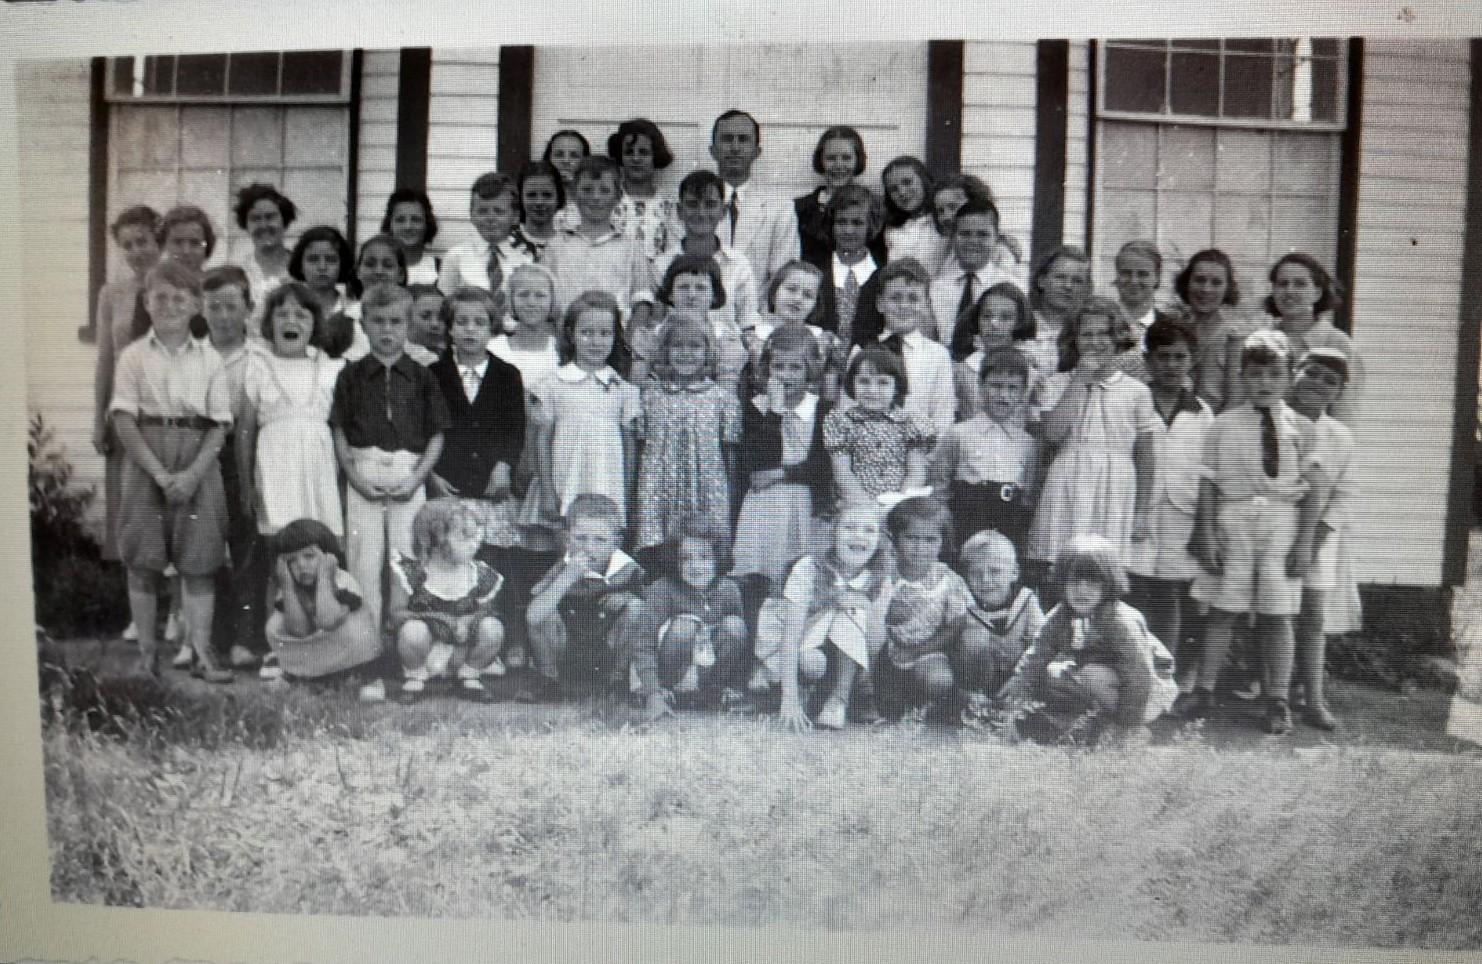 Black and white photograph of large group of children standing in front of a white building